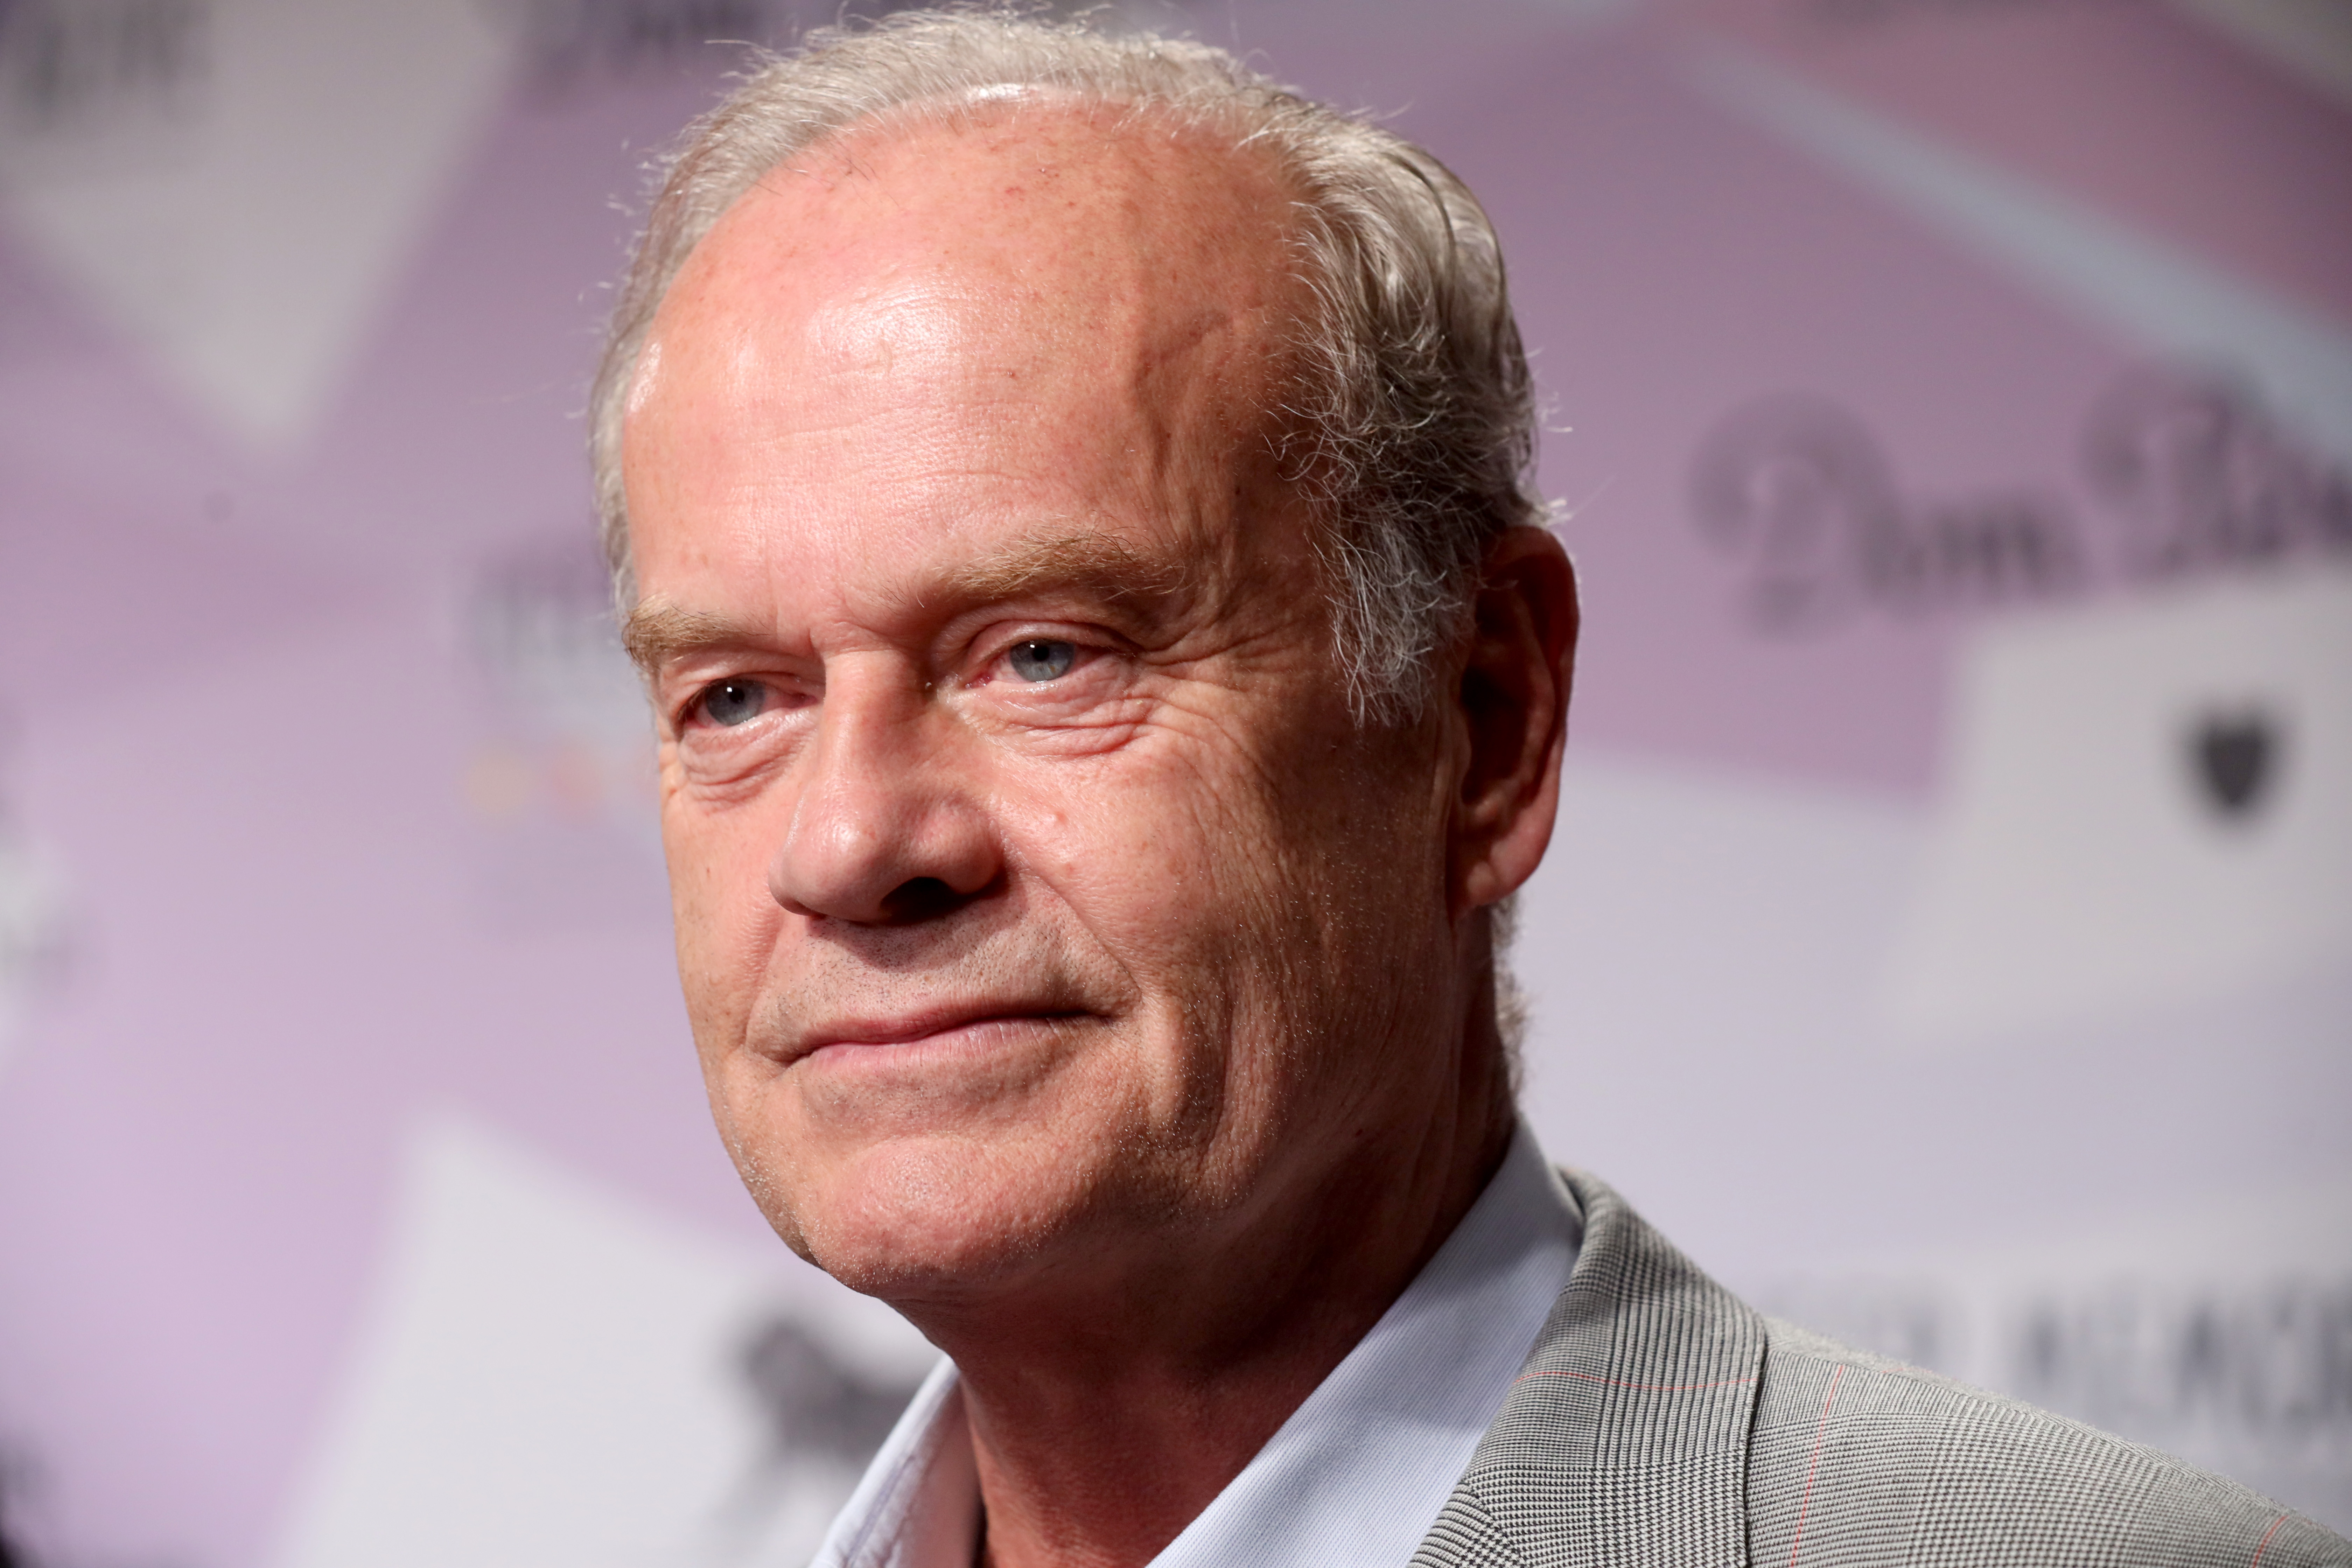 Kelsey Grammer during the 24th annual Keep Memory Alive "Power of Love Gala" benefit on March 7, 2020, in Las Vegas, Nevada | Source: Getty Images